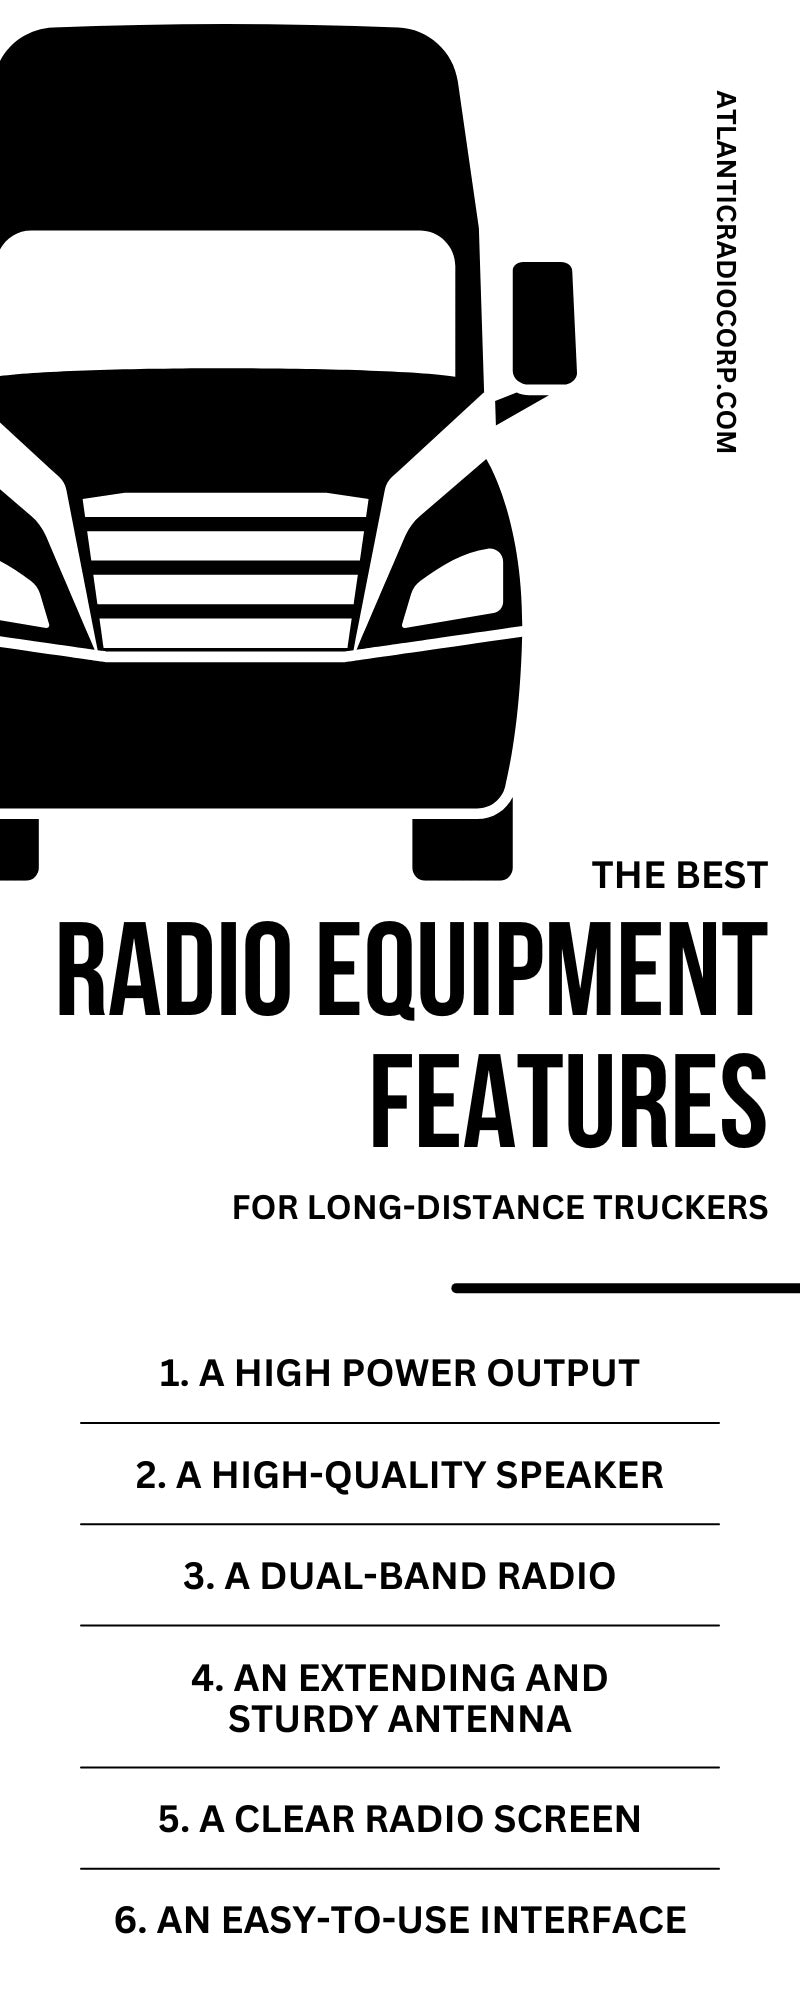 The Best Radio Equipment Features for Long-Distance Truckers